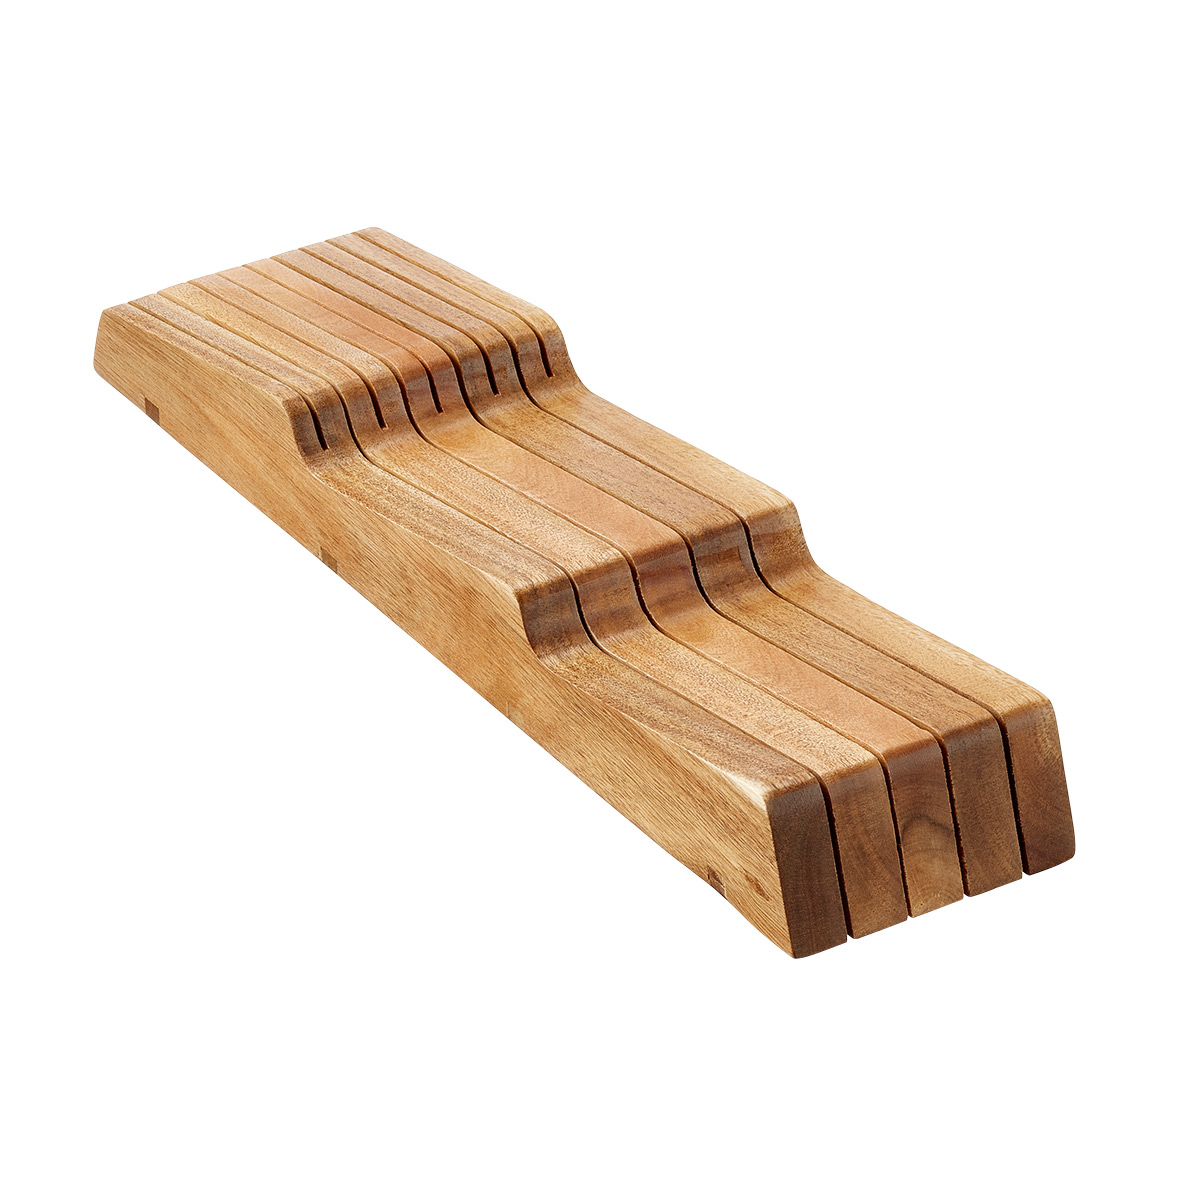 https://www.containerstore.com/catalogimages/453383/10089897_small_Acacia_in-drawer_knif.jpg